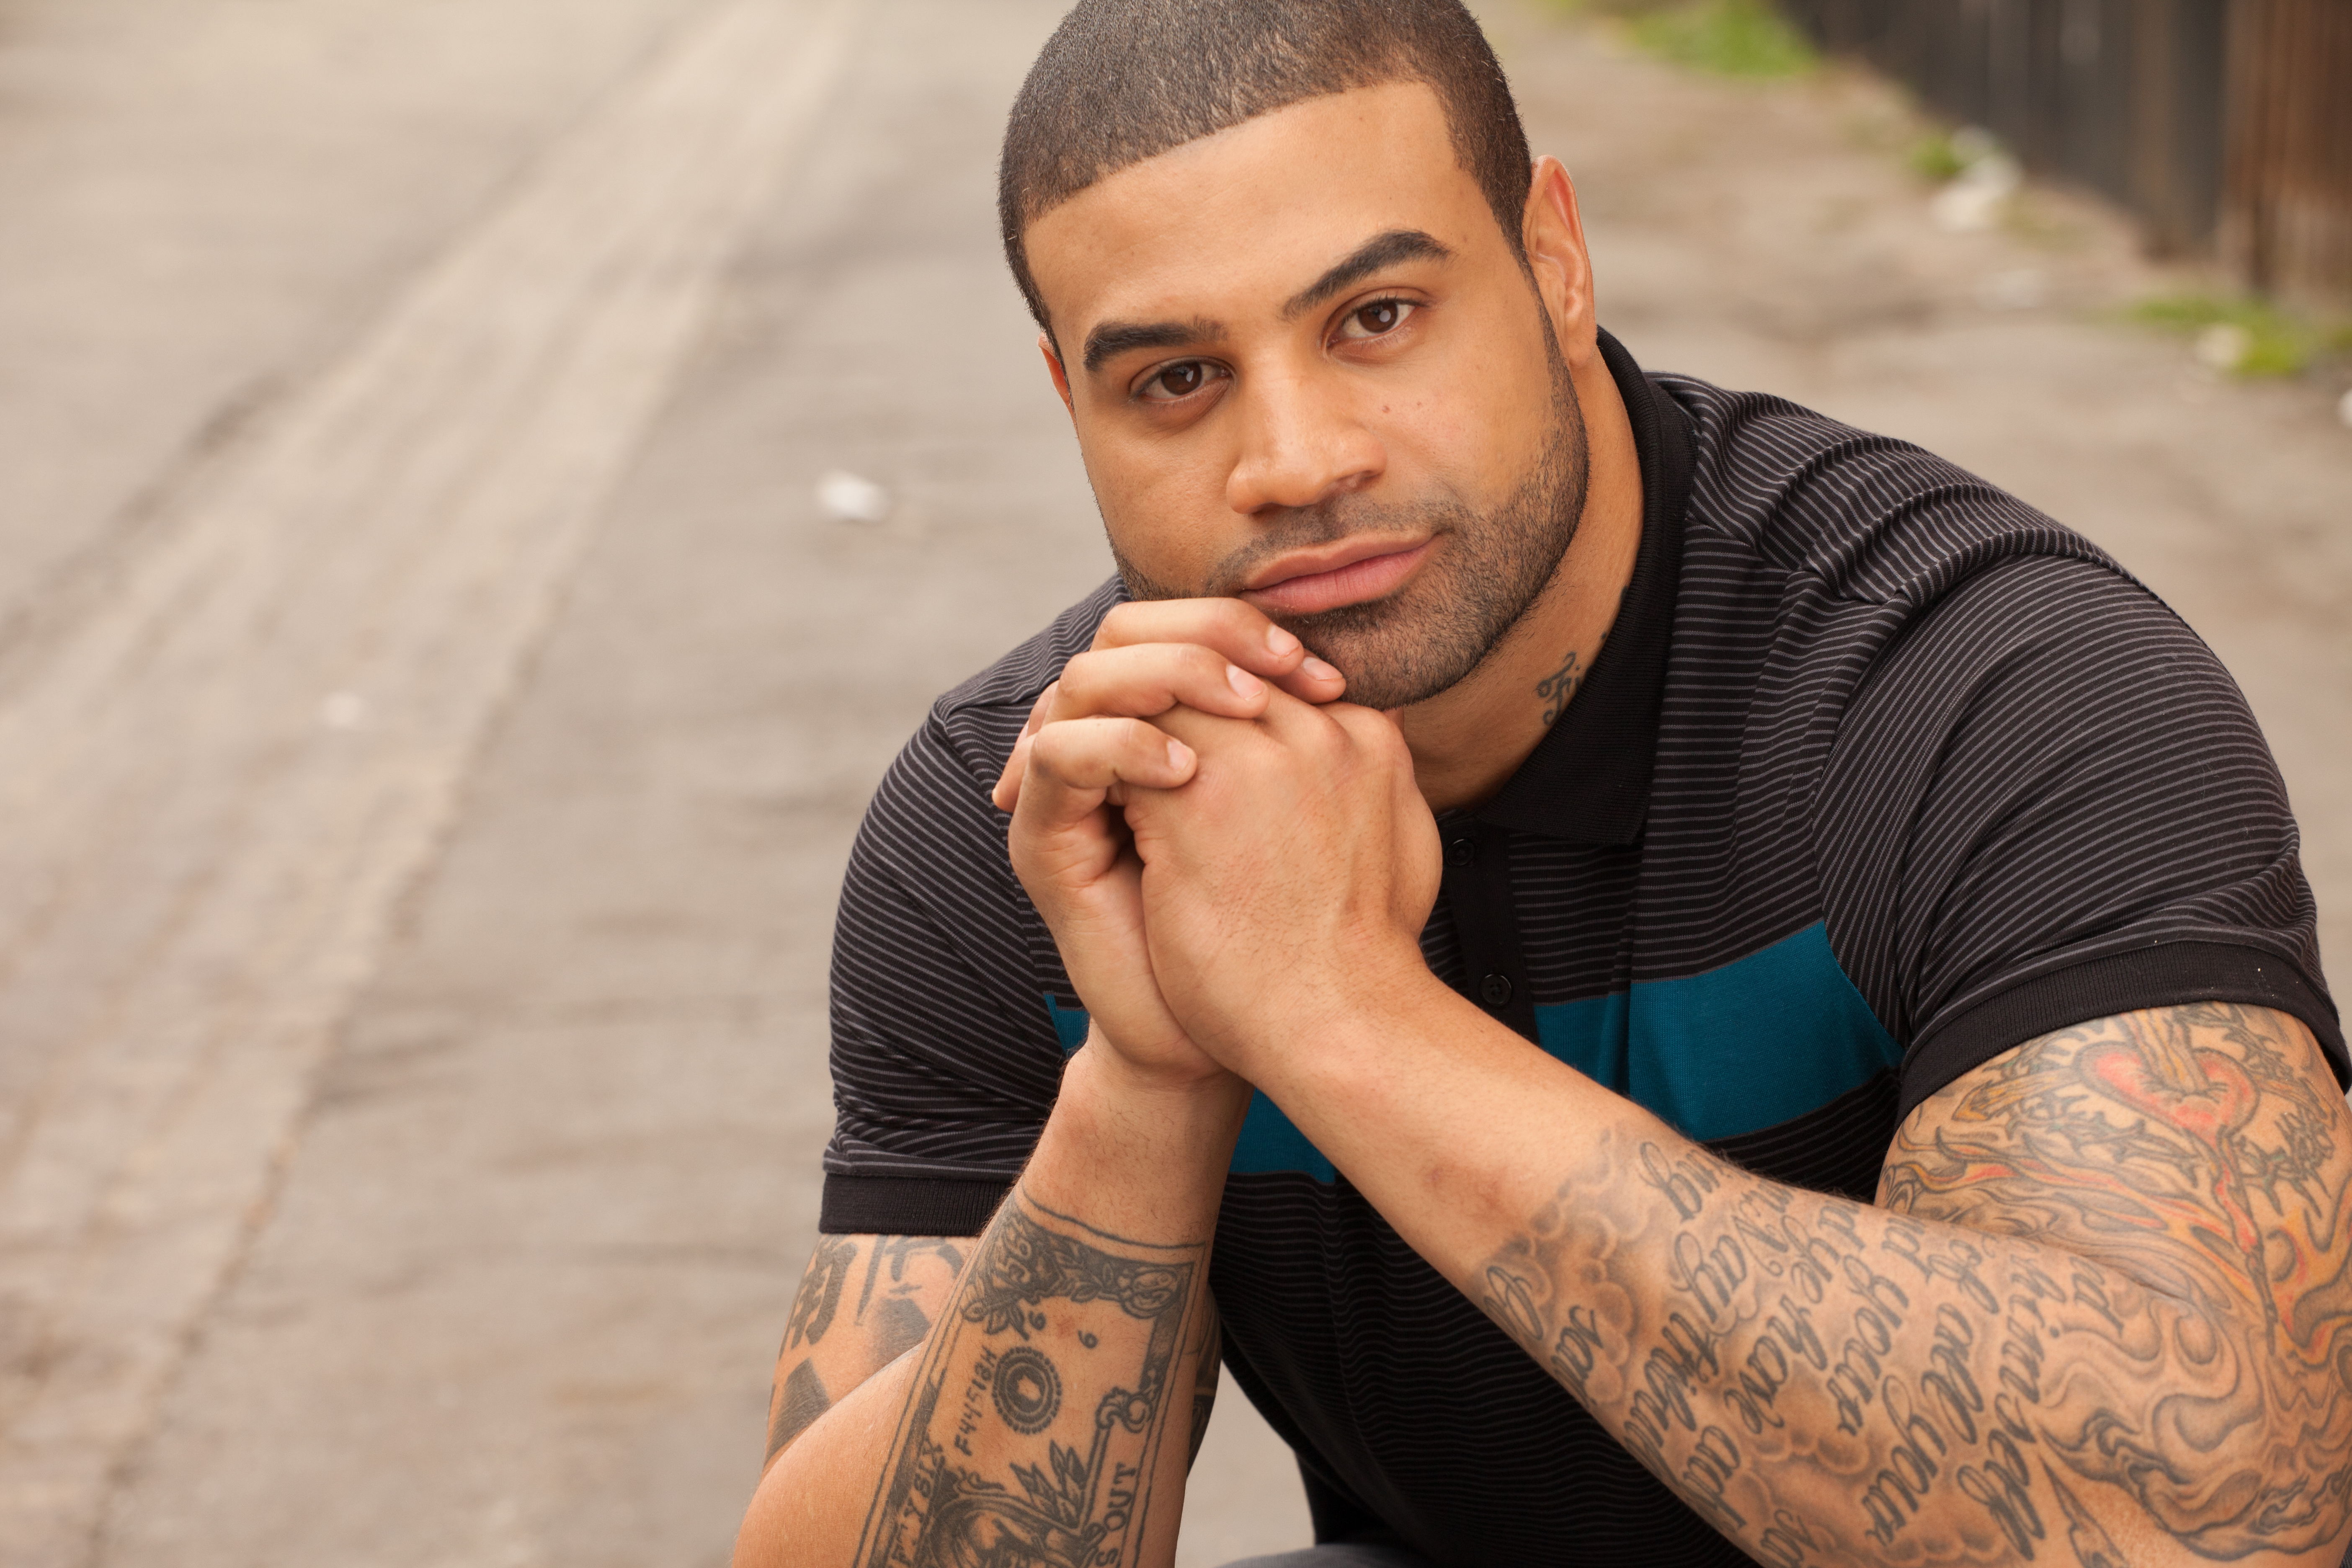 Lights On: Where Will Waived Shawne Merriman Hang His Jersey